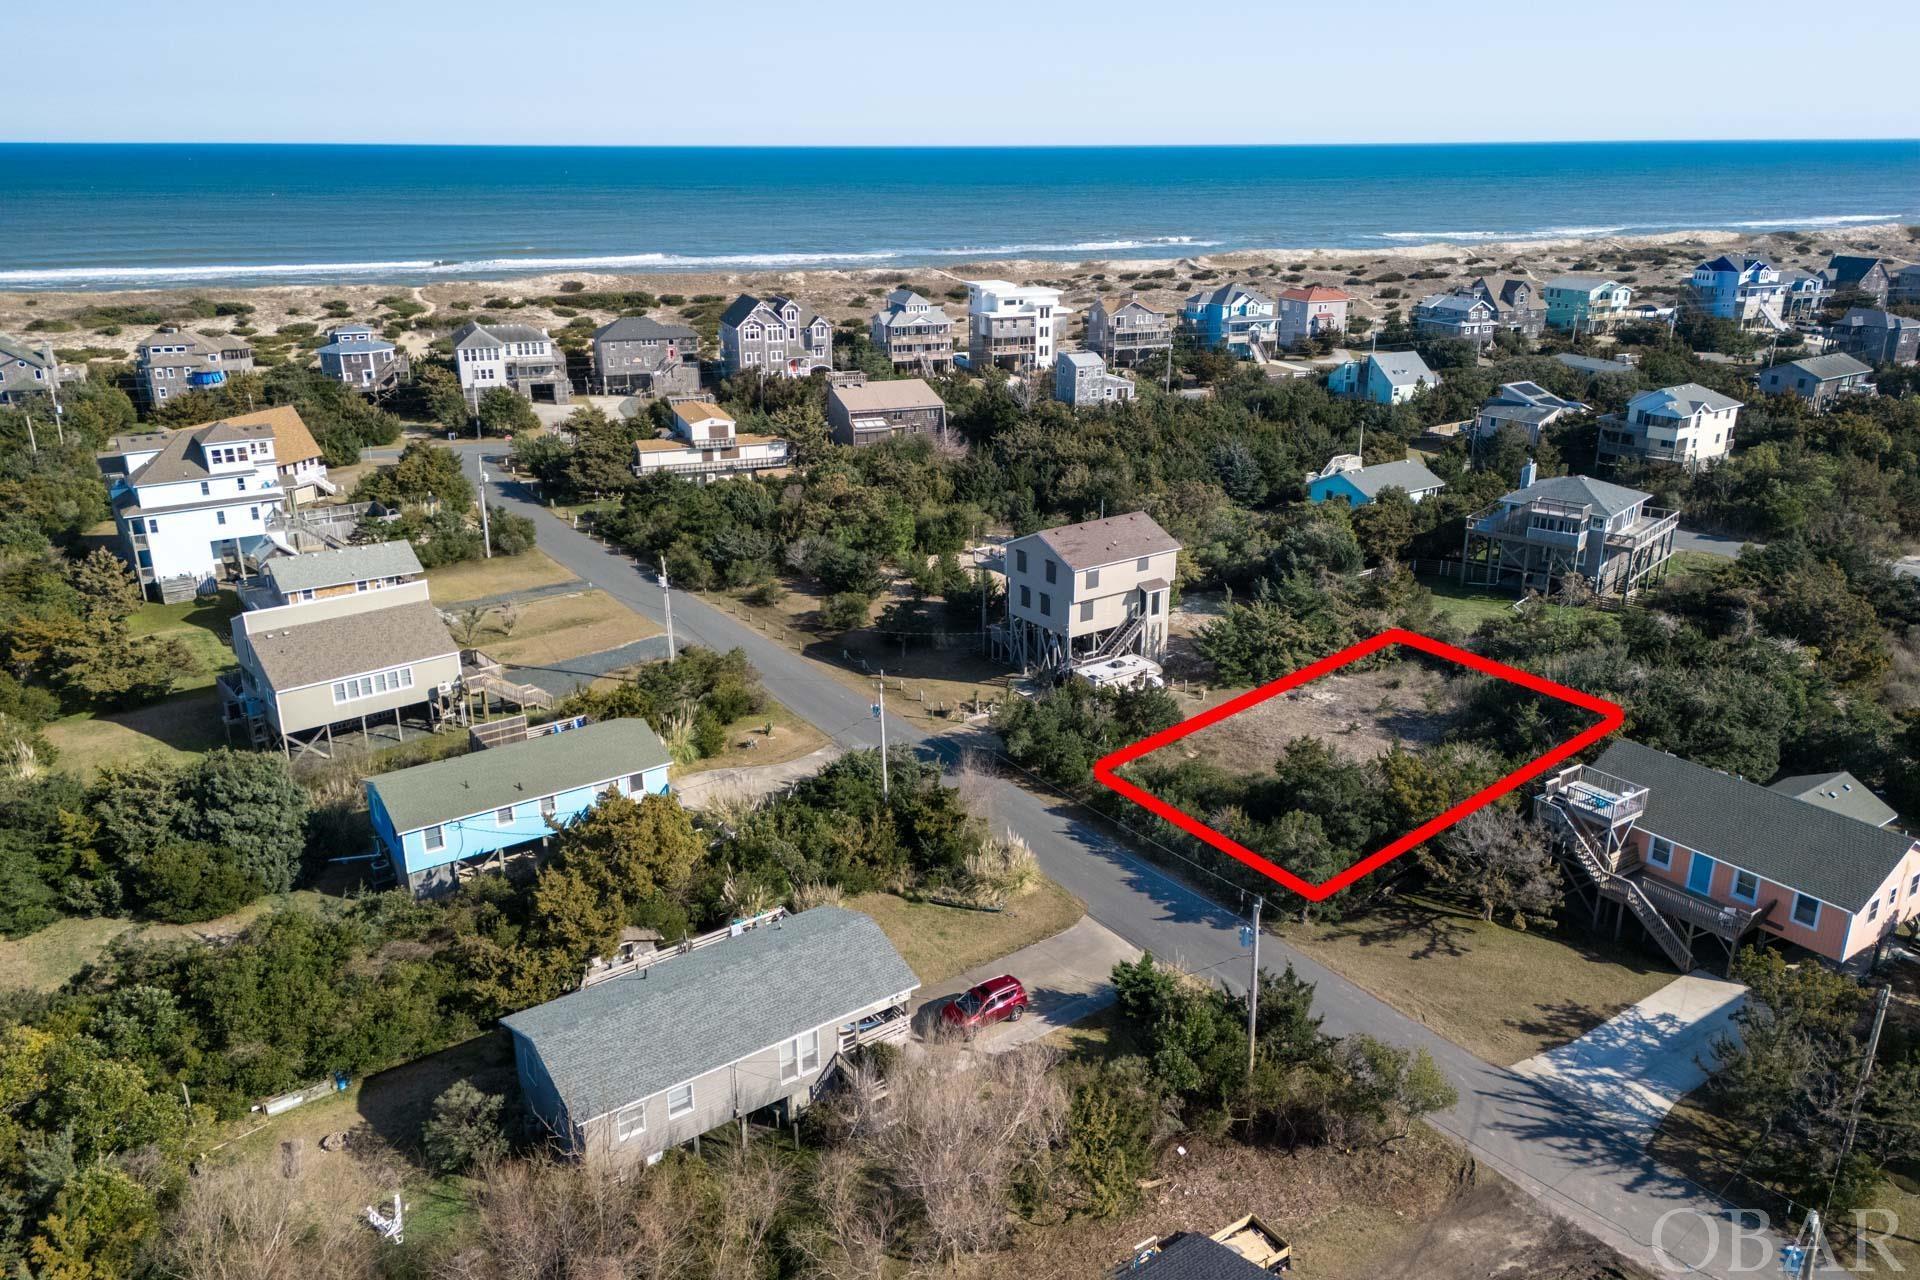 Discover the unparalleled opportunity to build your dream home on this prime piece of land nestled in the heart of the prestigious Hatteras Colony in Salvo. This exceptional property offers direct beach access, ensuring your days are filled with sand, surf, and sun, while sound access across the street in the Wind Over Waves subdivision promises serene water views and activities. Remarkably, this lot comes free of HOA fees and its located in the "shaded X" flood zone, where flood insurance is not required, alongside the convenience of a prepaid water tap fee and a four bedroom septic permit easing the initial steps towards construction. Situated near Real Watersports, the epicenter of kiteboarding, and the Salvo Day Use Area, with its picnic-friendly spaces, shallow waters, and sound side access, this lot is perfectly positioned for both leisure and adventure. The proximity to a multi-use sidewalk path that stretches across the entire Tri-Villages, along with easy access to all the shopping, dining, and entertainment the Outer Banks have to offer. Additionally, the lot's stable protective dune and wide beaches provide a naturally beautiful and serene backdrop for your future home. Whether you envision a permanent residence, a vacation retreat, or an investment property, this vacant lot in Salvo's Hatteras Colony offers the perfect canvas for your coastal lifestyle dreams. Don't let this opportunity pass you by!